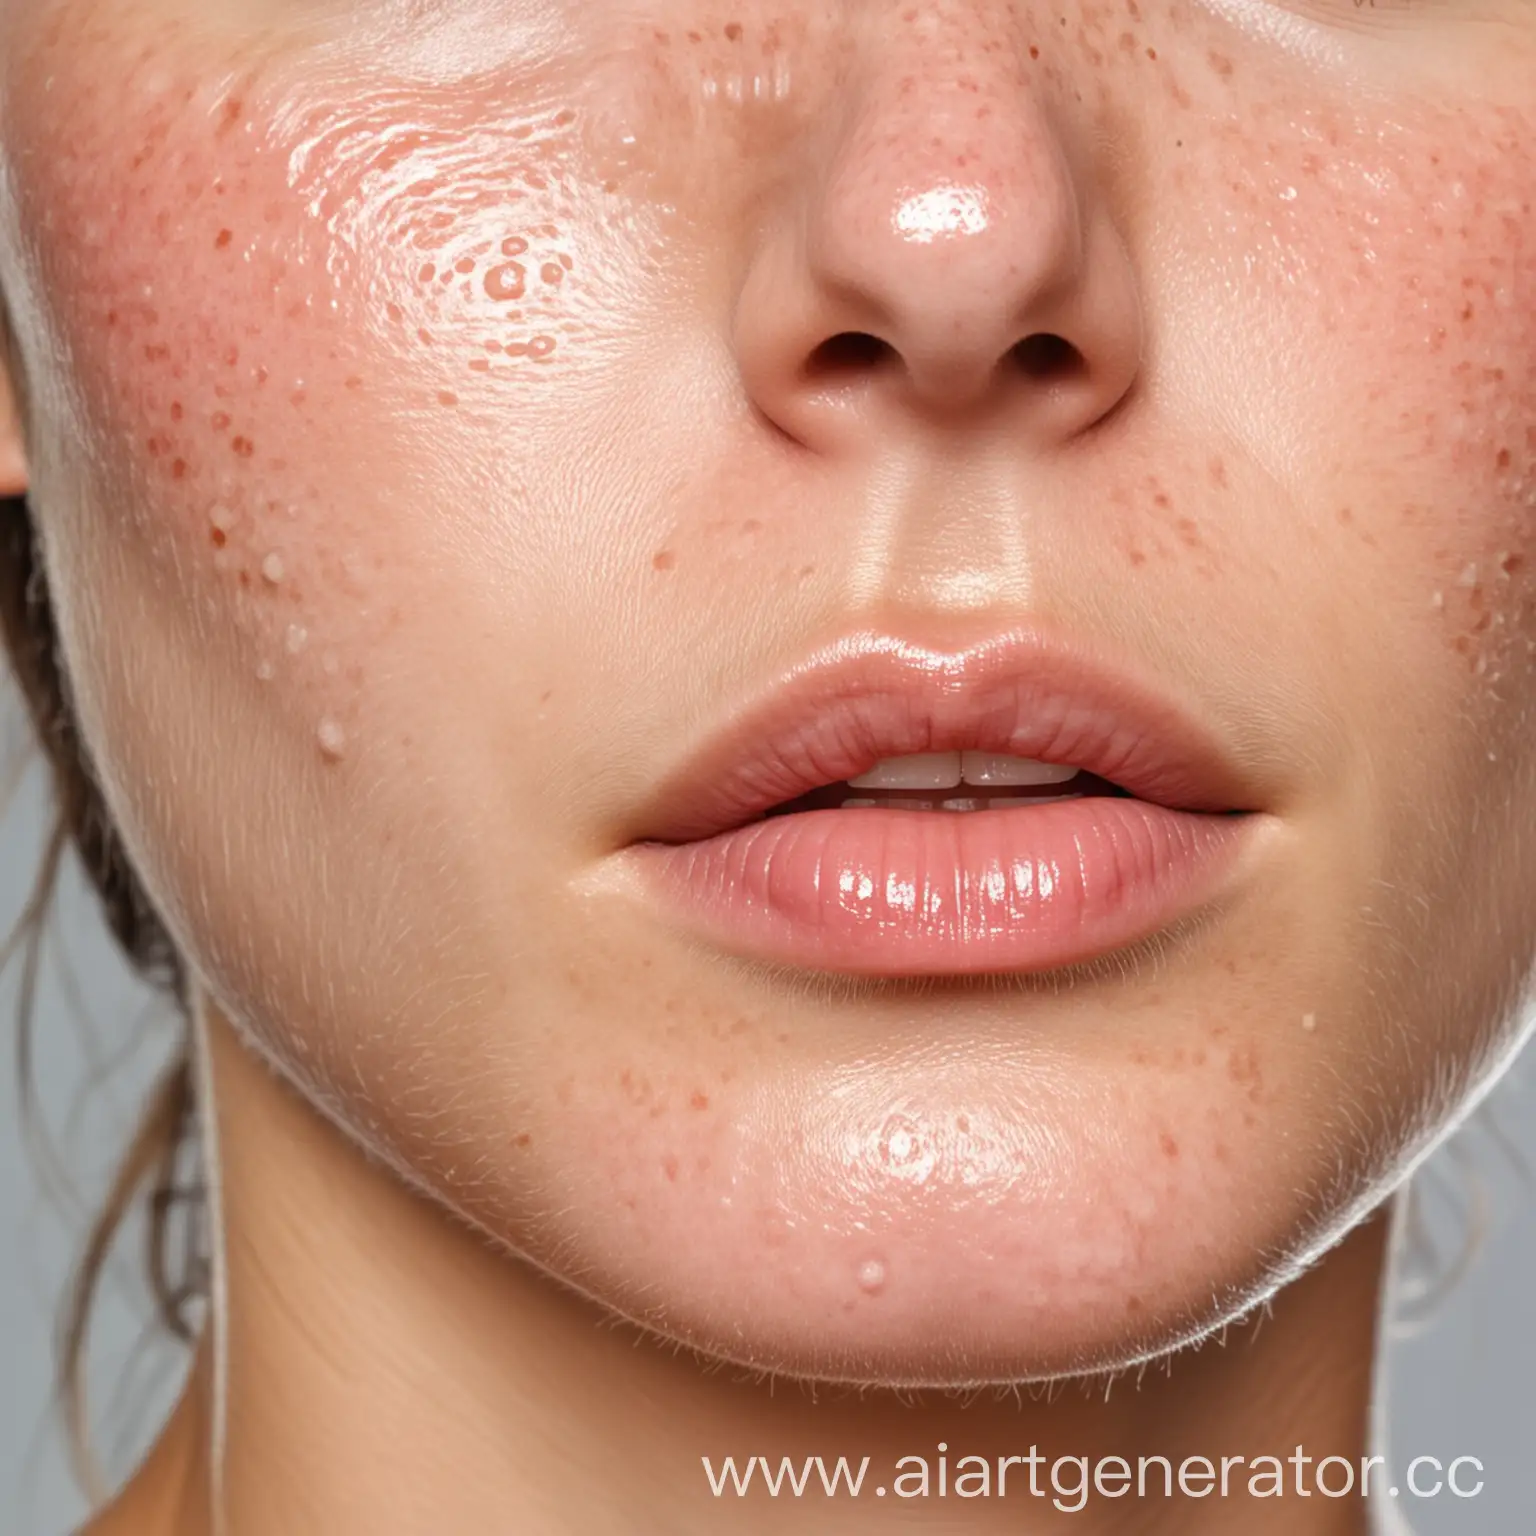 Effective-Acne-Treatment-Solutions-Dermatologist-Consultation-and-Skincare-Products